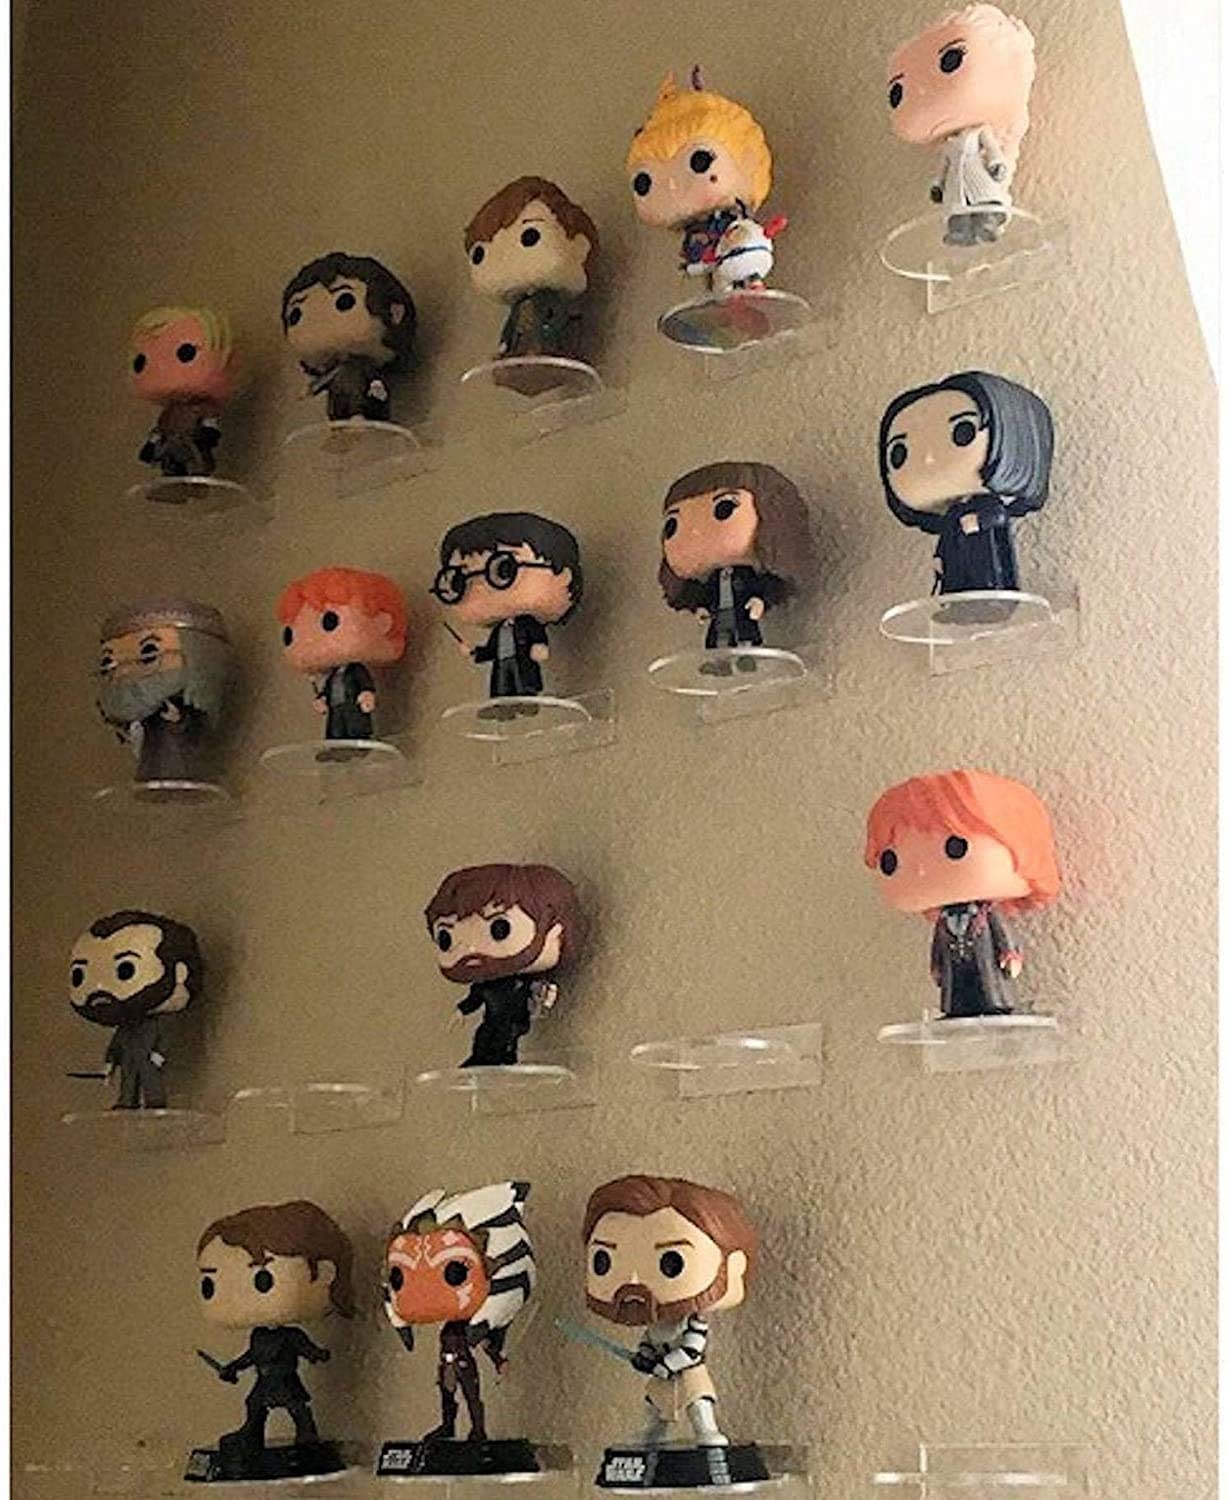 For Funko Pop Vinyl and Funko Pin: Clear Acrylic Wall Stand, Stick On, Single Shelf No Nails or Screws